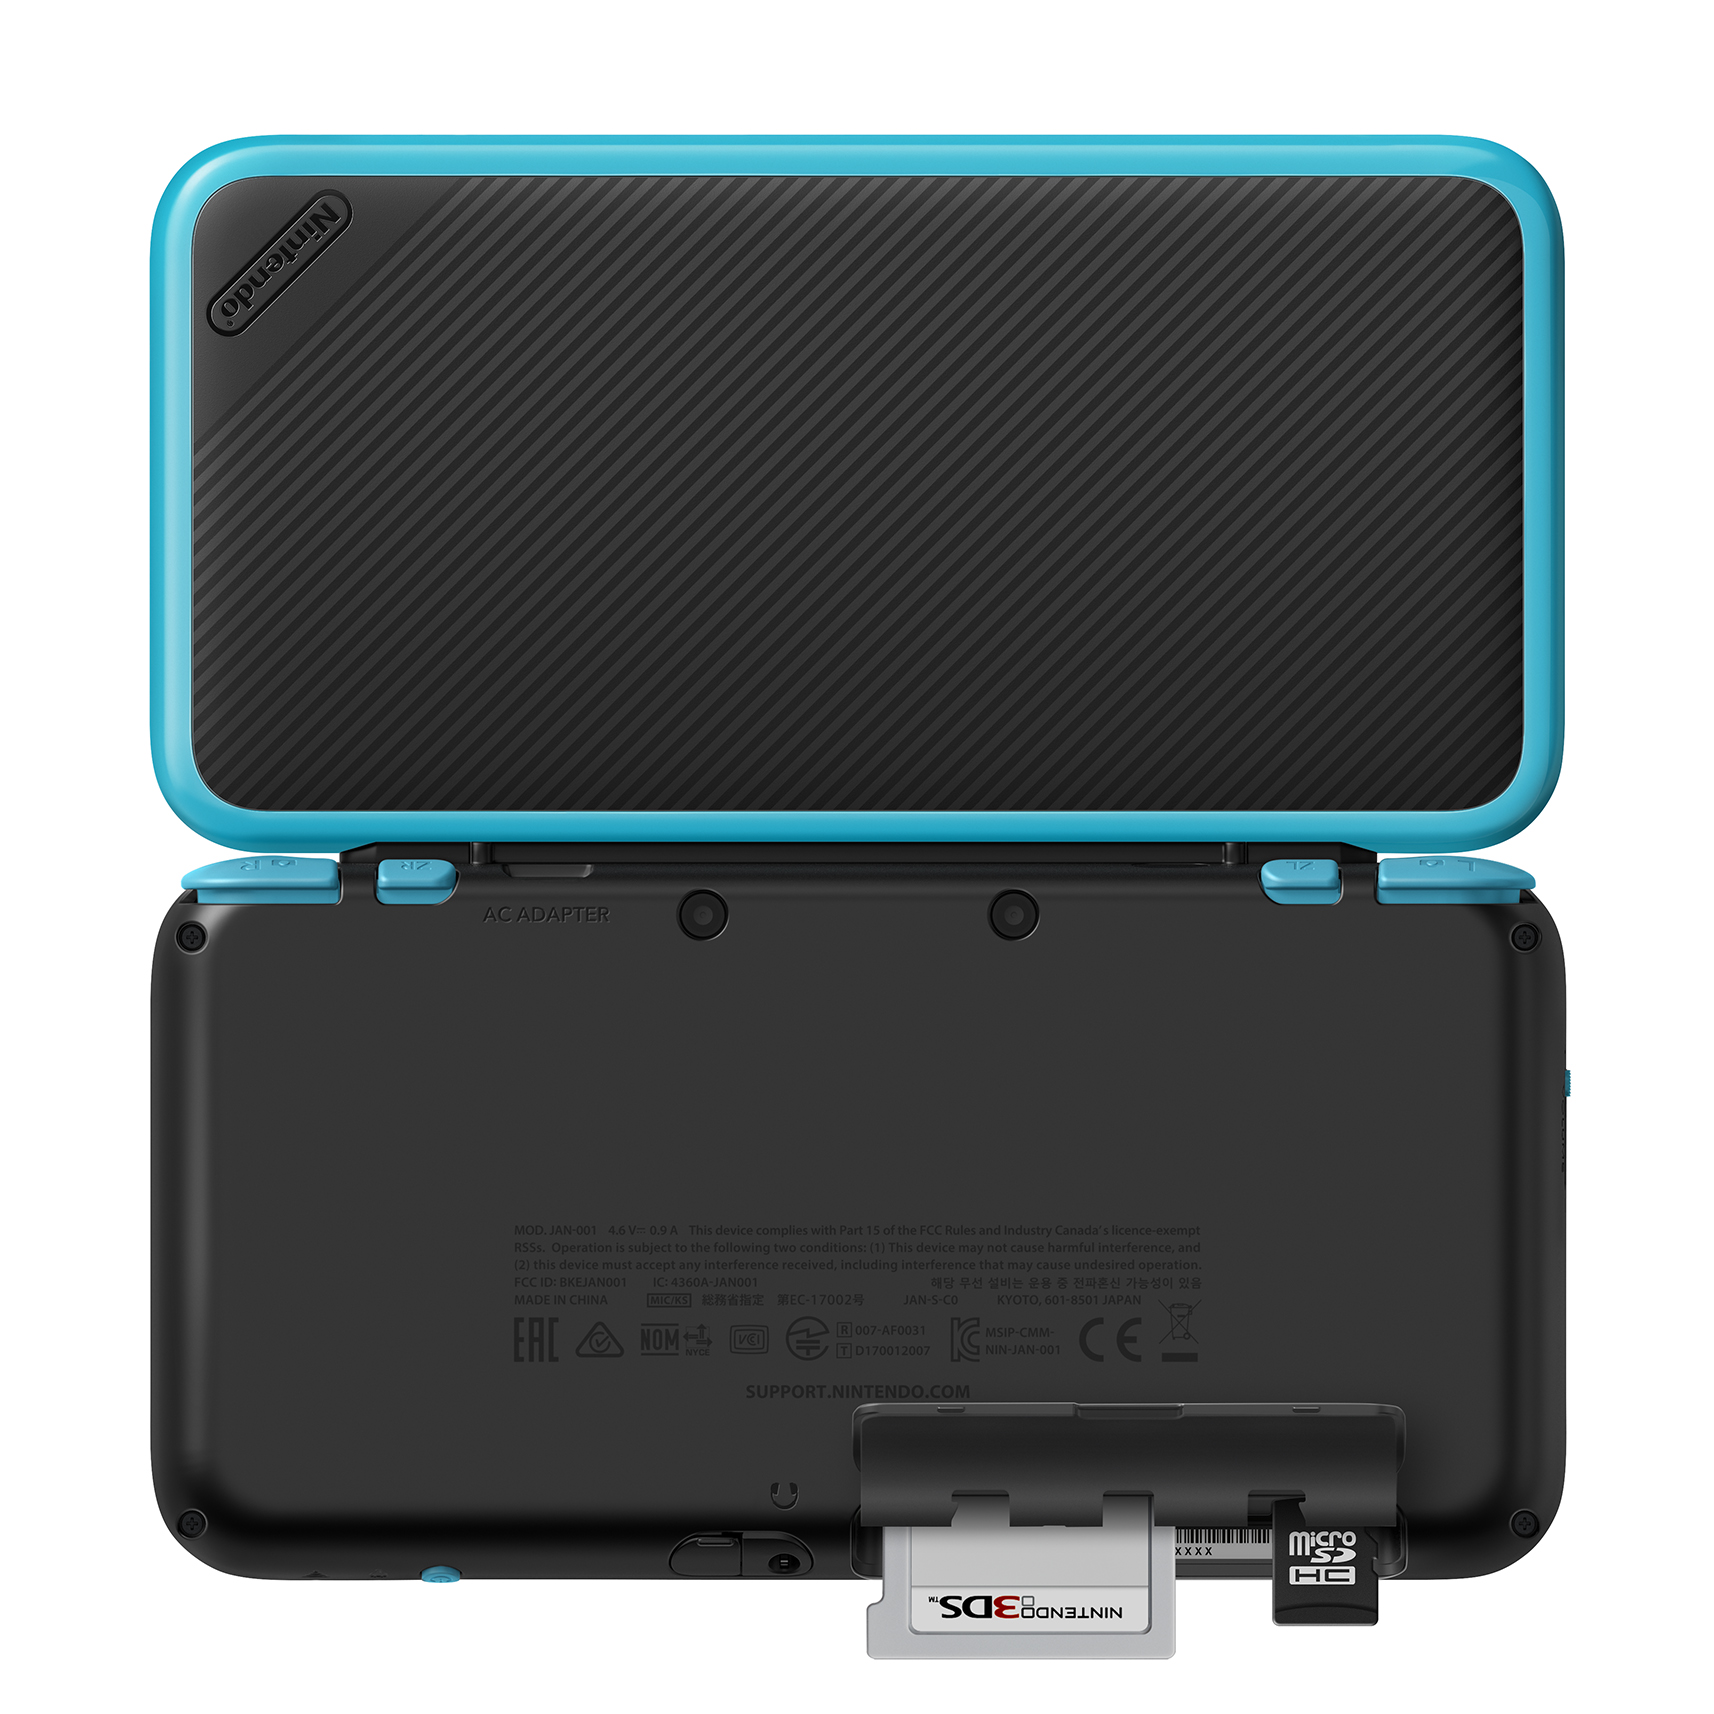 New Nintendo 2DS XL System w/ Mario Kart 7 Pre-installed, Black & Turquoise - image 5 of 6